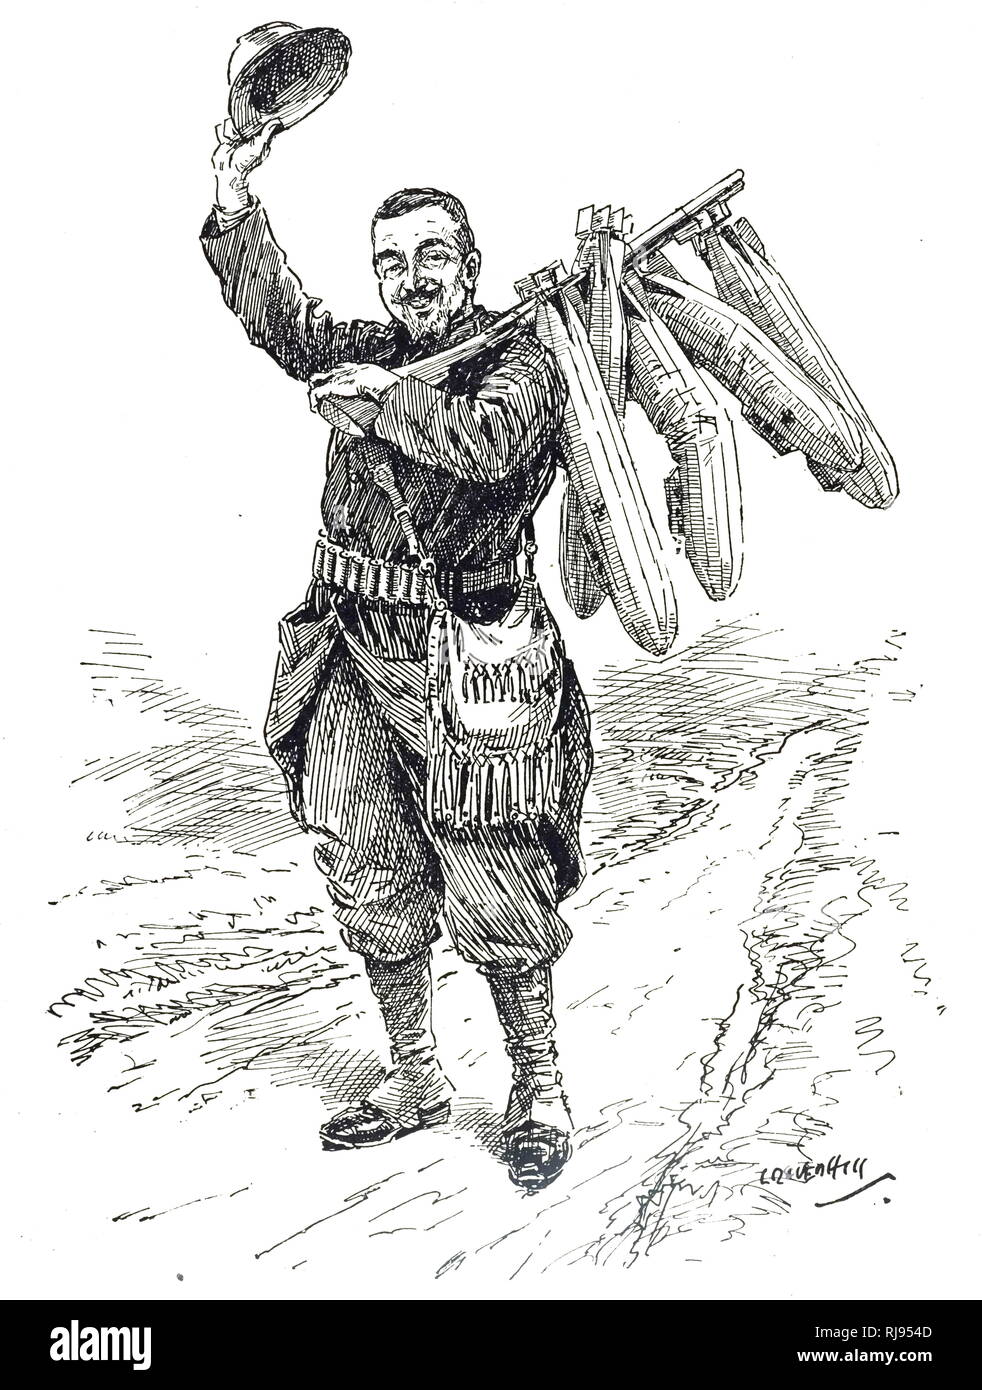 A cartoon commenting on the vulnerability of Zeppelins in the face of anti-aircraft fire. Dated 20th century Stock Photo